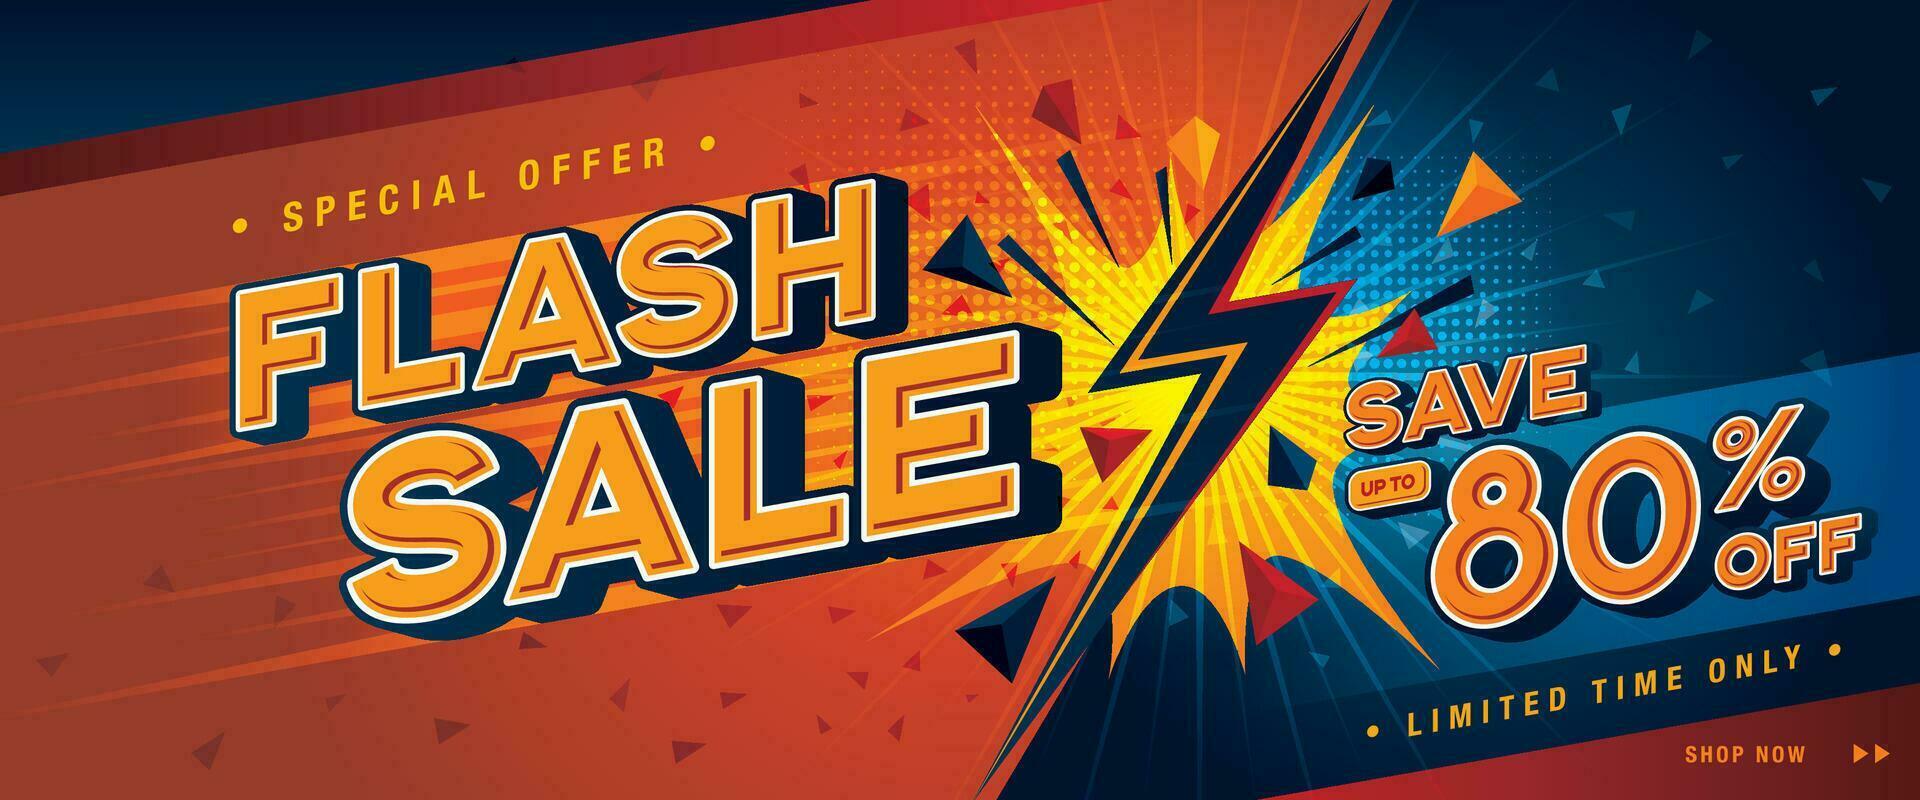 Flash Sale Banner Template design special offer discount, Shopping banner vector